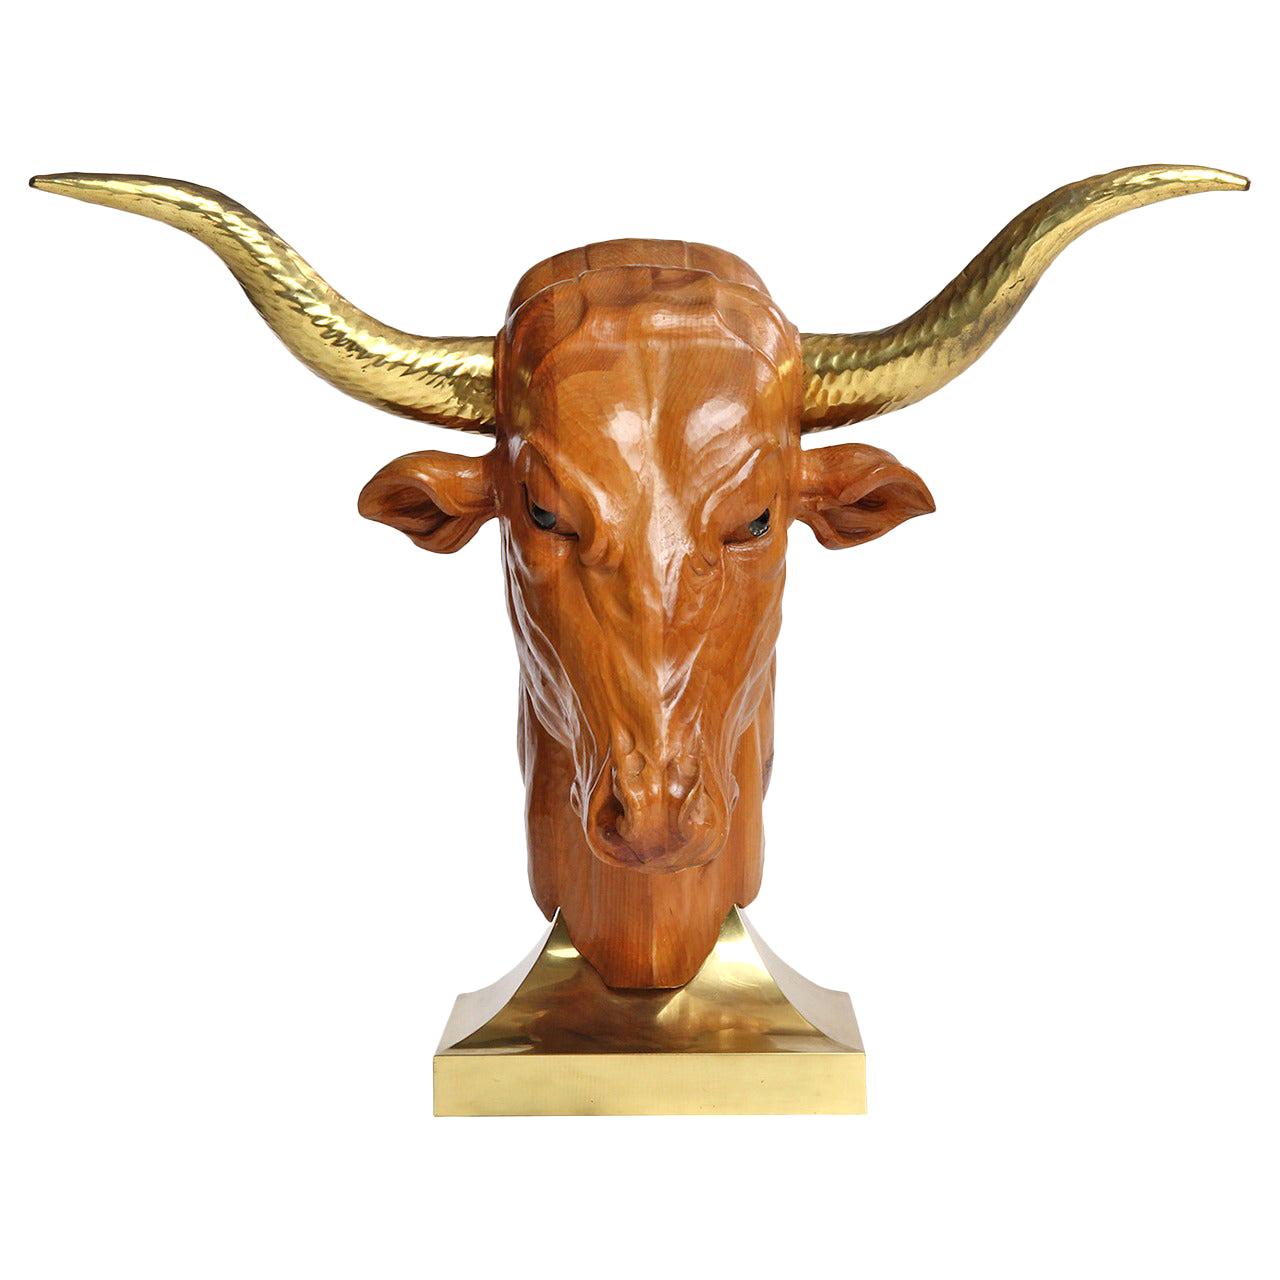 Pair of Carved Wooden Bull Sculptures Europe Circa 1840 For Sale at 1stDibs